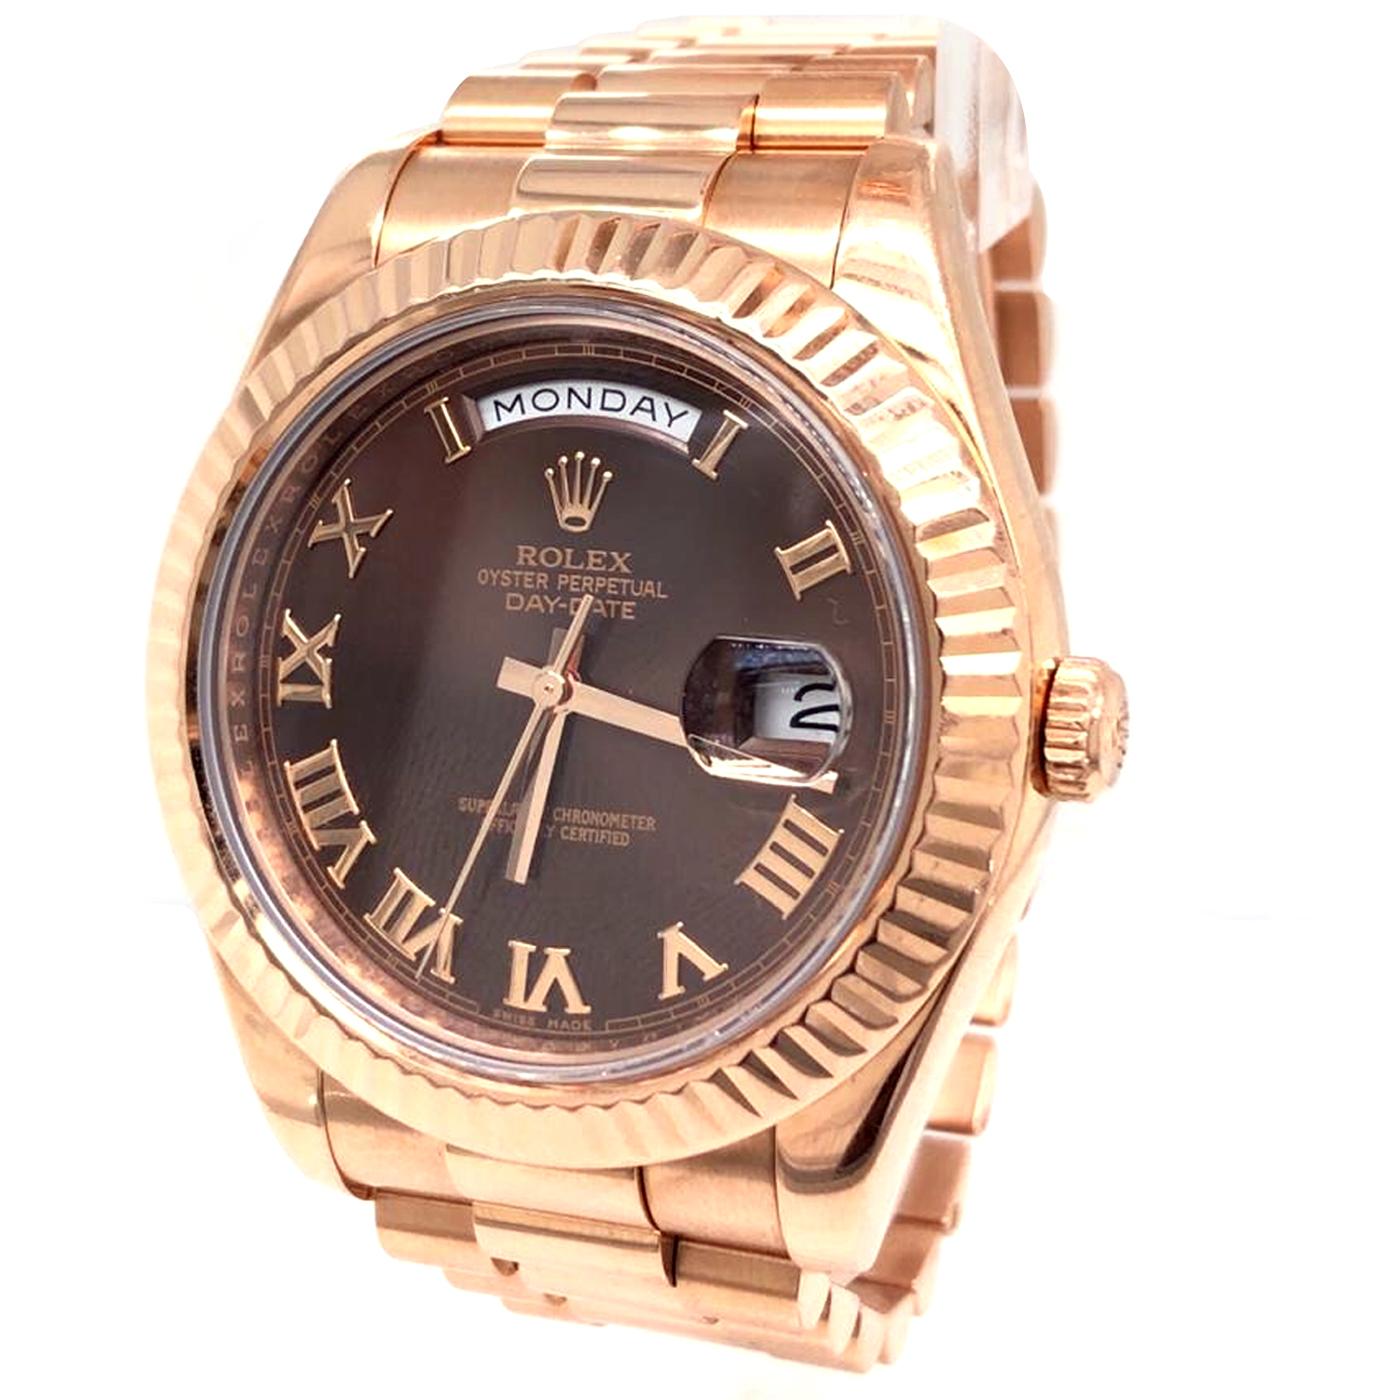 This Rolex 218235 has a 41mm rose gold case that has a solid case back, a sapphire crystal, a screw-down crown, and a fluted rose gold bezel. The dial is a rich chocolate with rose gold roman numeral hour markers, a date window at 3-o-clock, and the